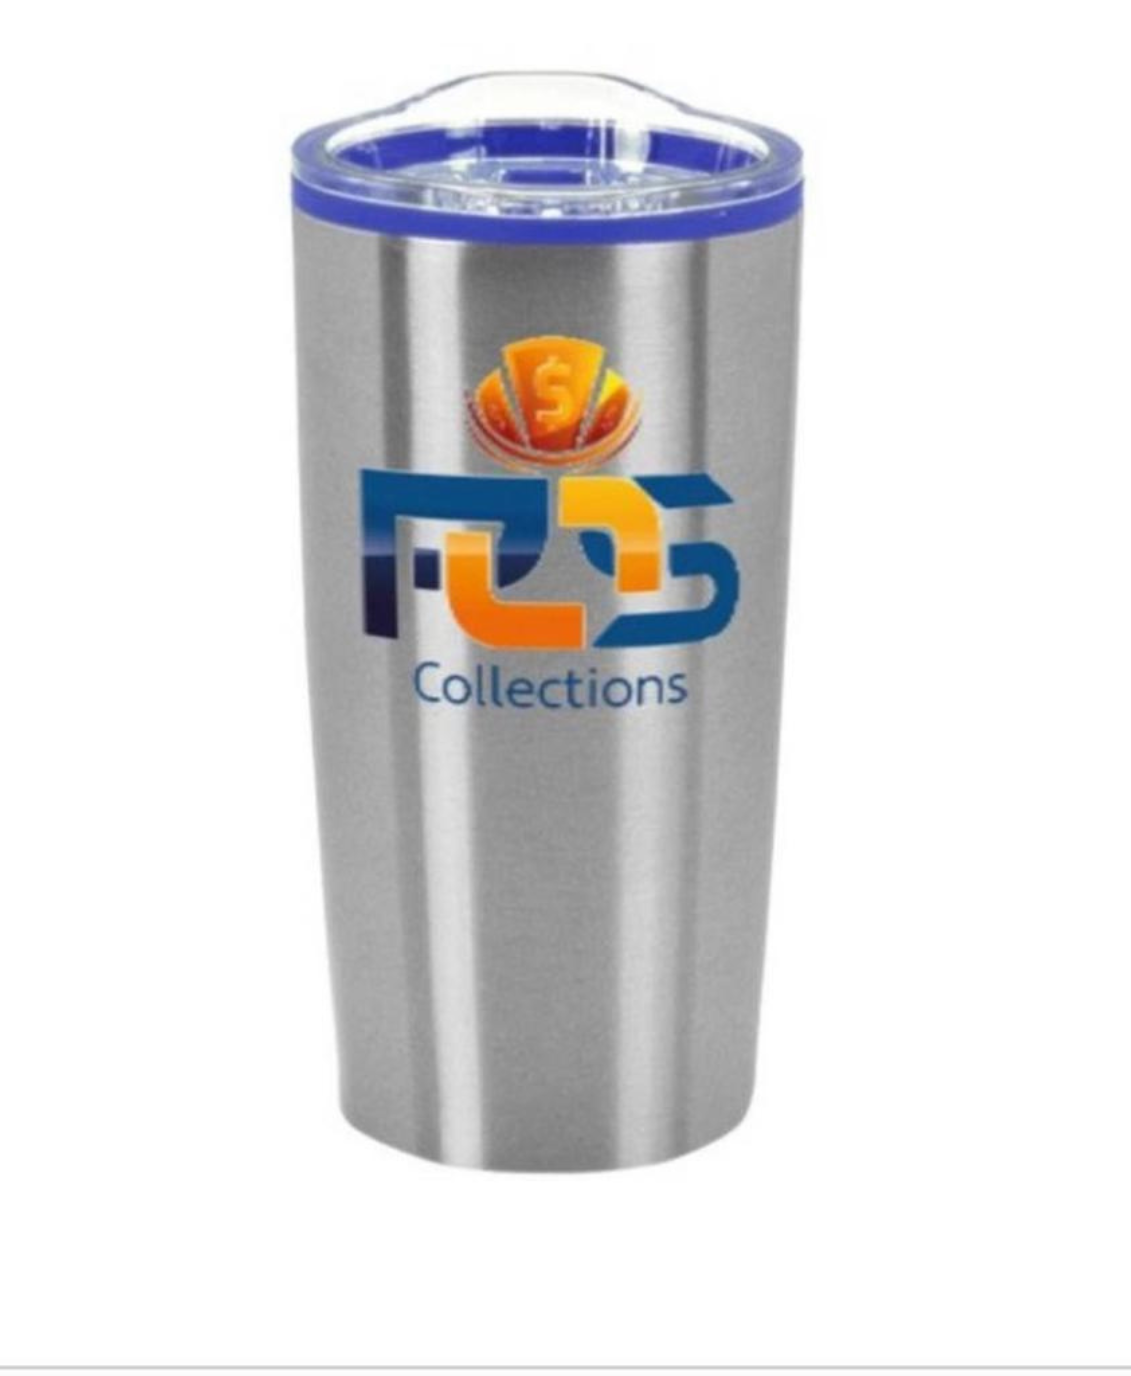 Stainless Steel Tumblers Bulk 20oz Double Wall Vacuum Insulated by Pixiss |  Bulk Cup Coffee Mug with Lid, Travel Mug Works Great for Ice Drink, Hot